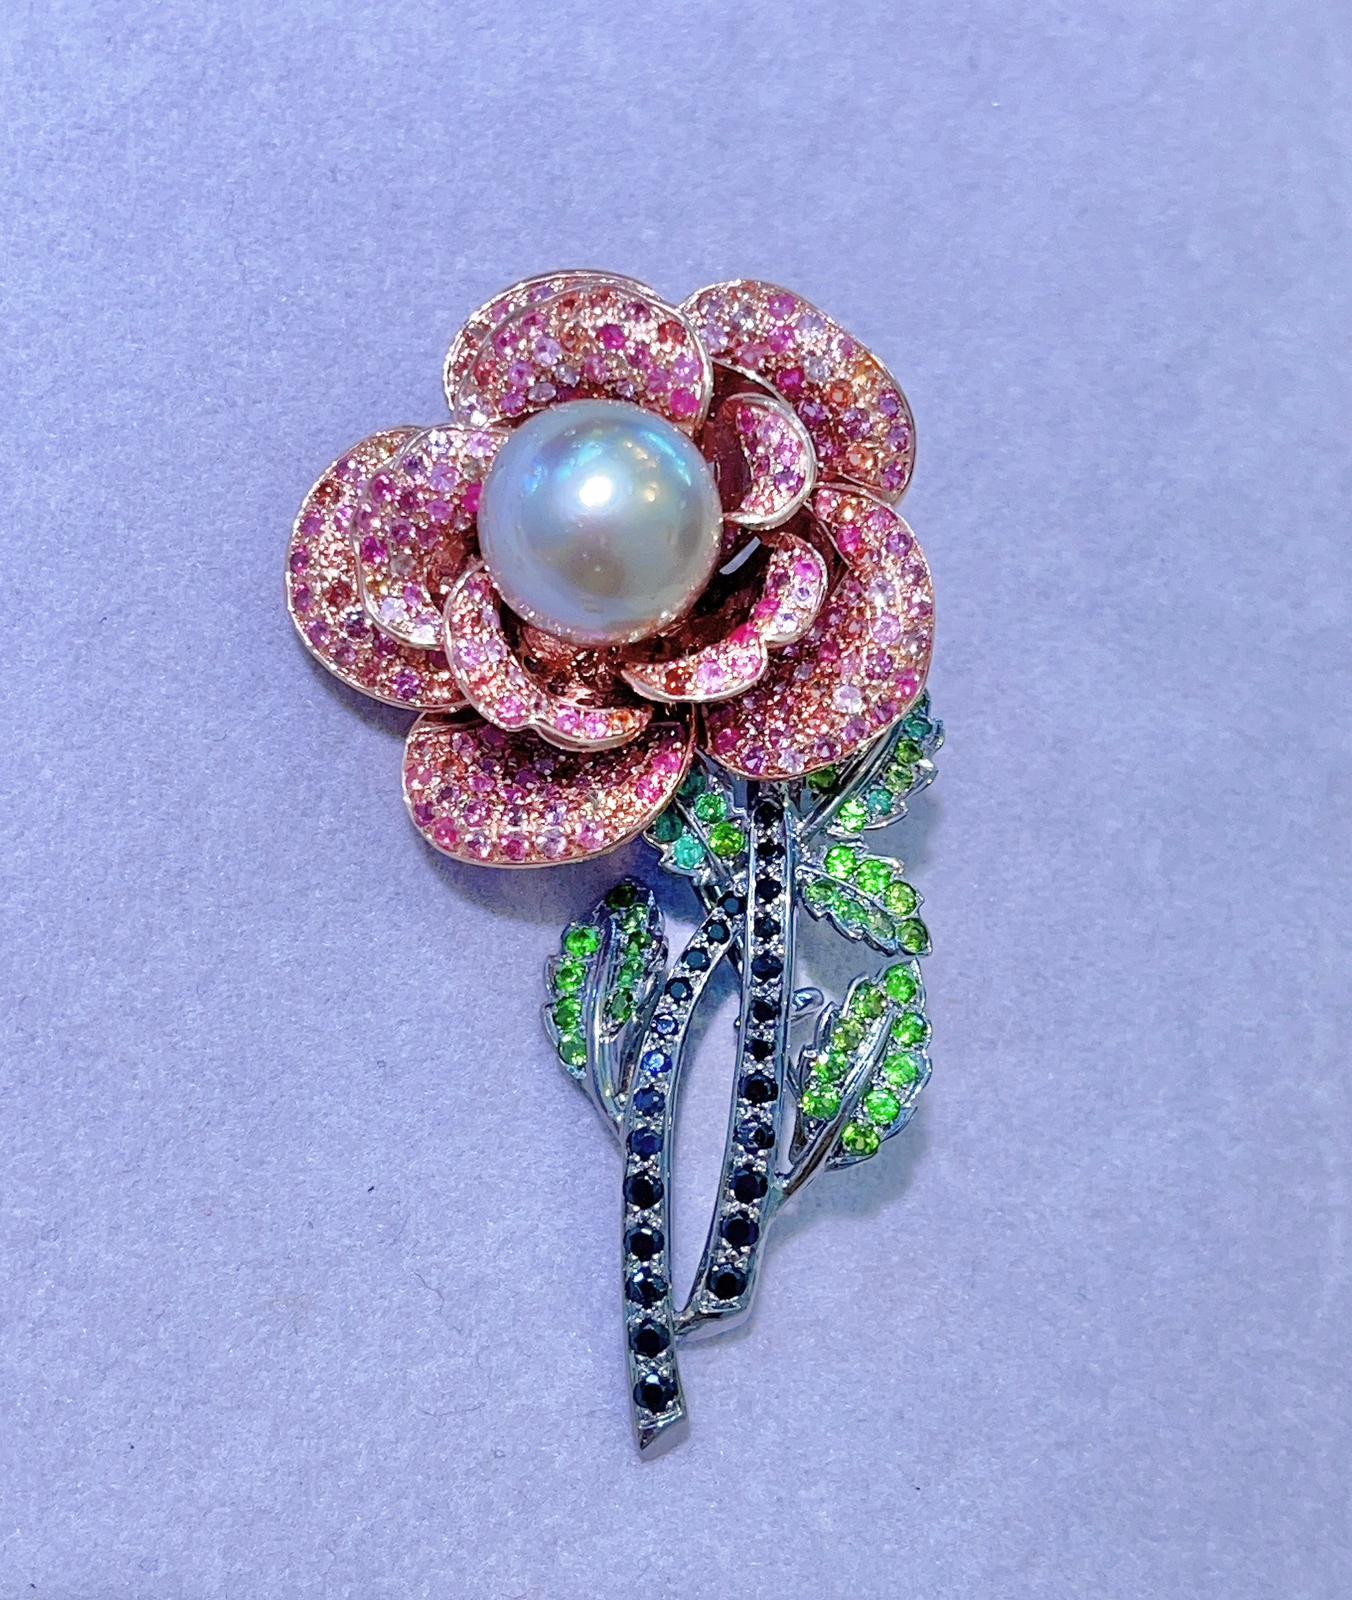 Bochic “Orient” Pink Sapphire & Pearl Brooch Set in 22K Gold & Silver 
Multi natural gem Brooch 
Beautiful Mix of Natural Pink Sapphires, Rubies & White Topaz are Pave set at the Patel’s  - 4 carats
Brilliant cut shapes 
Green Chrome dioxide on the